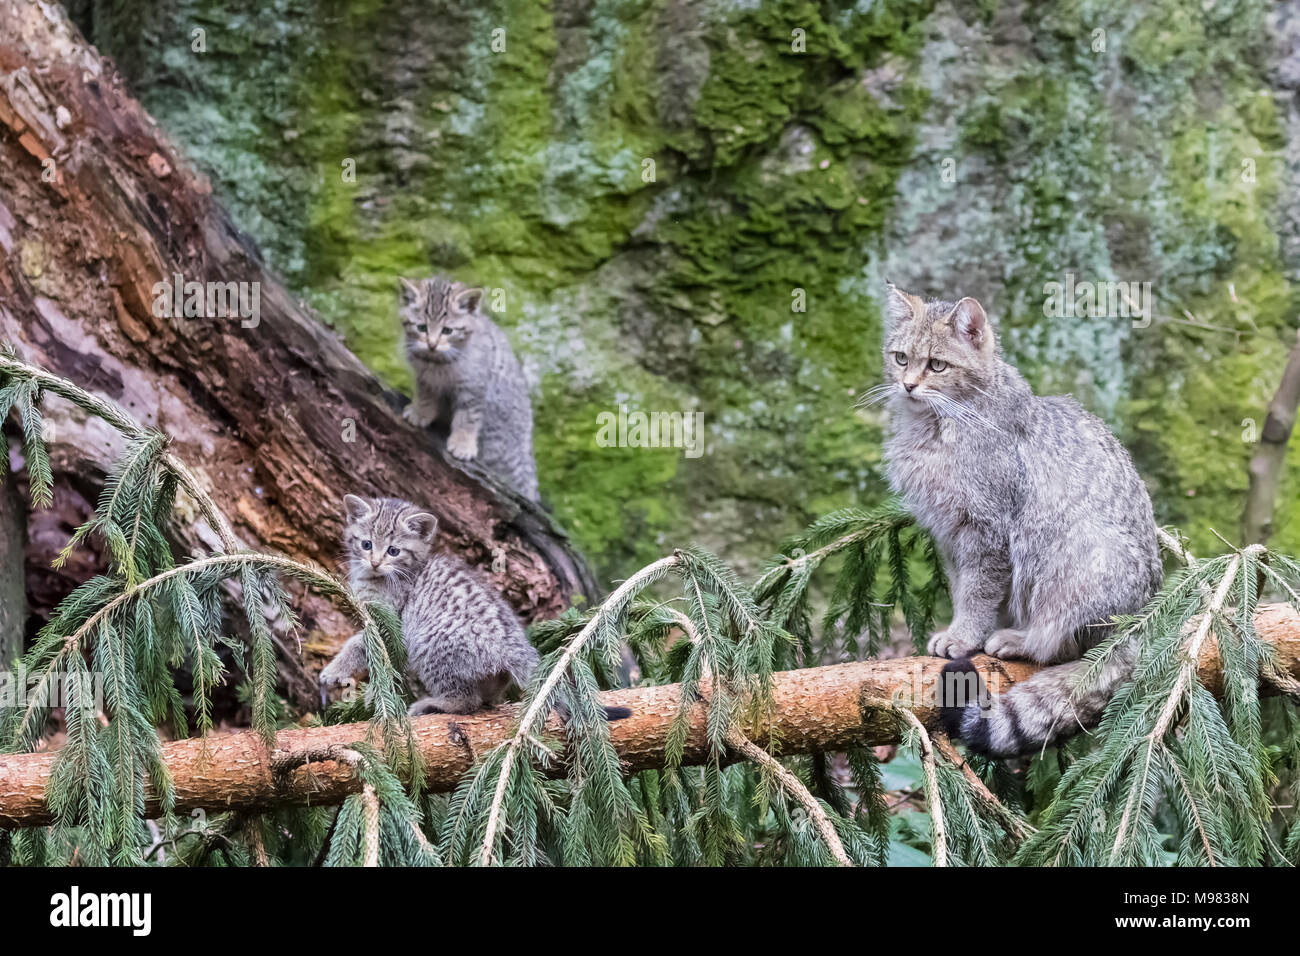 Germany, Bavarian Forest National Park, animal Open-air site Neuschoenau, wild cats, Felis silvestris, mother animal with young animals Stock Photo